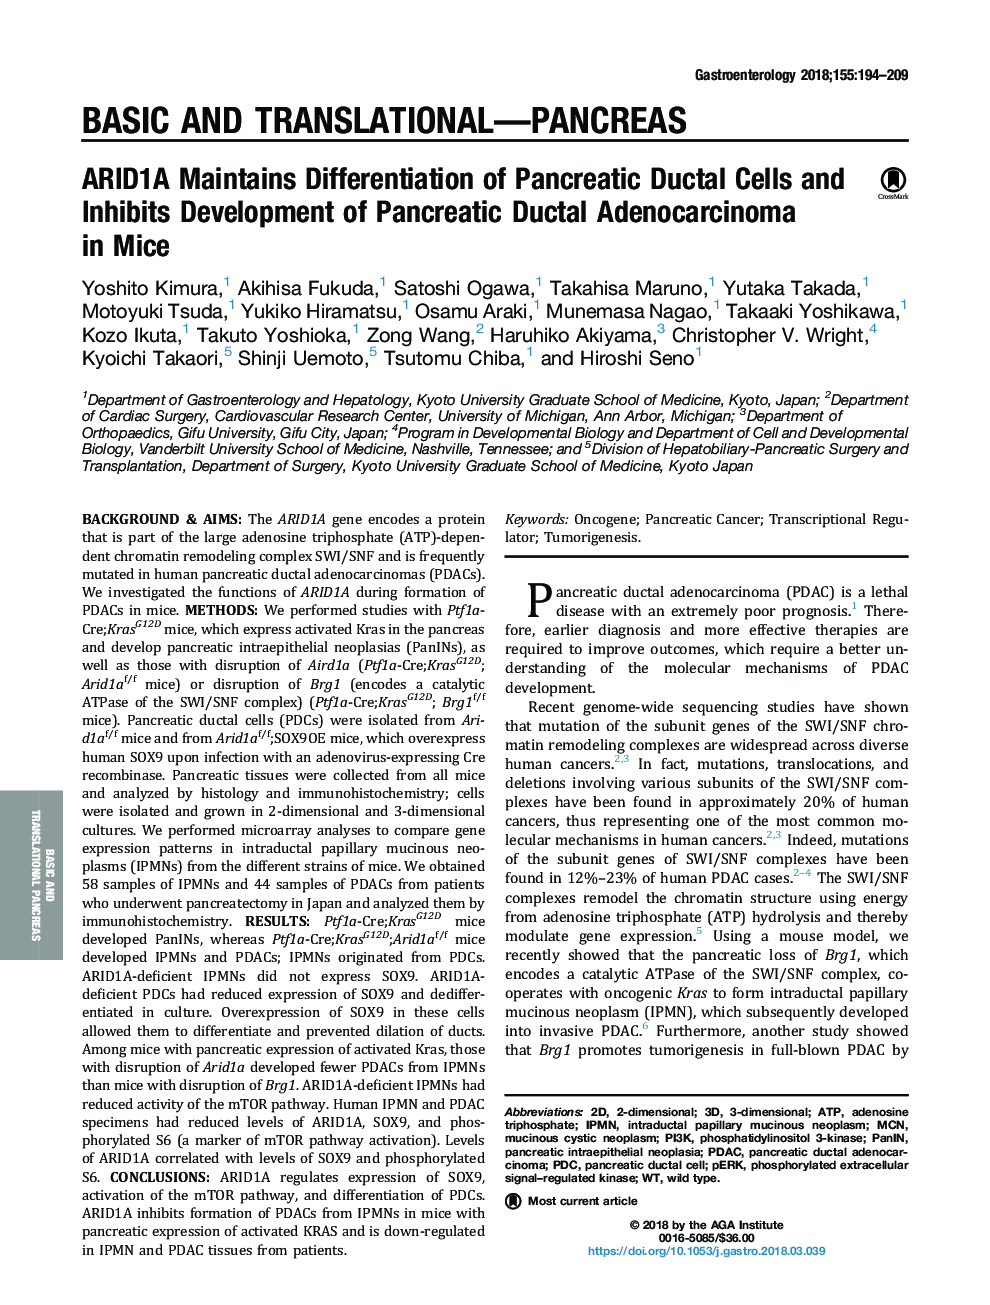 ARID1A Maintains Differentiation of Pancreatic Ductal Cells and Inhibits Development of Pancreatic Ductal Adenocarcinoma inÂ Mice